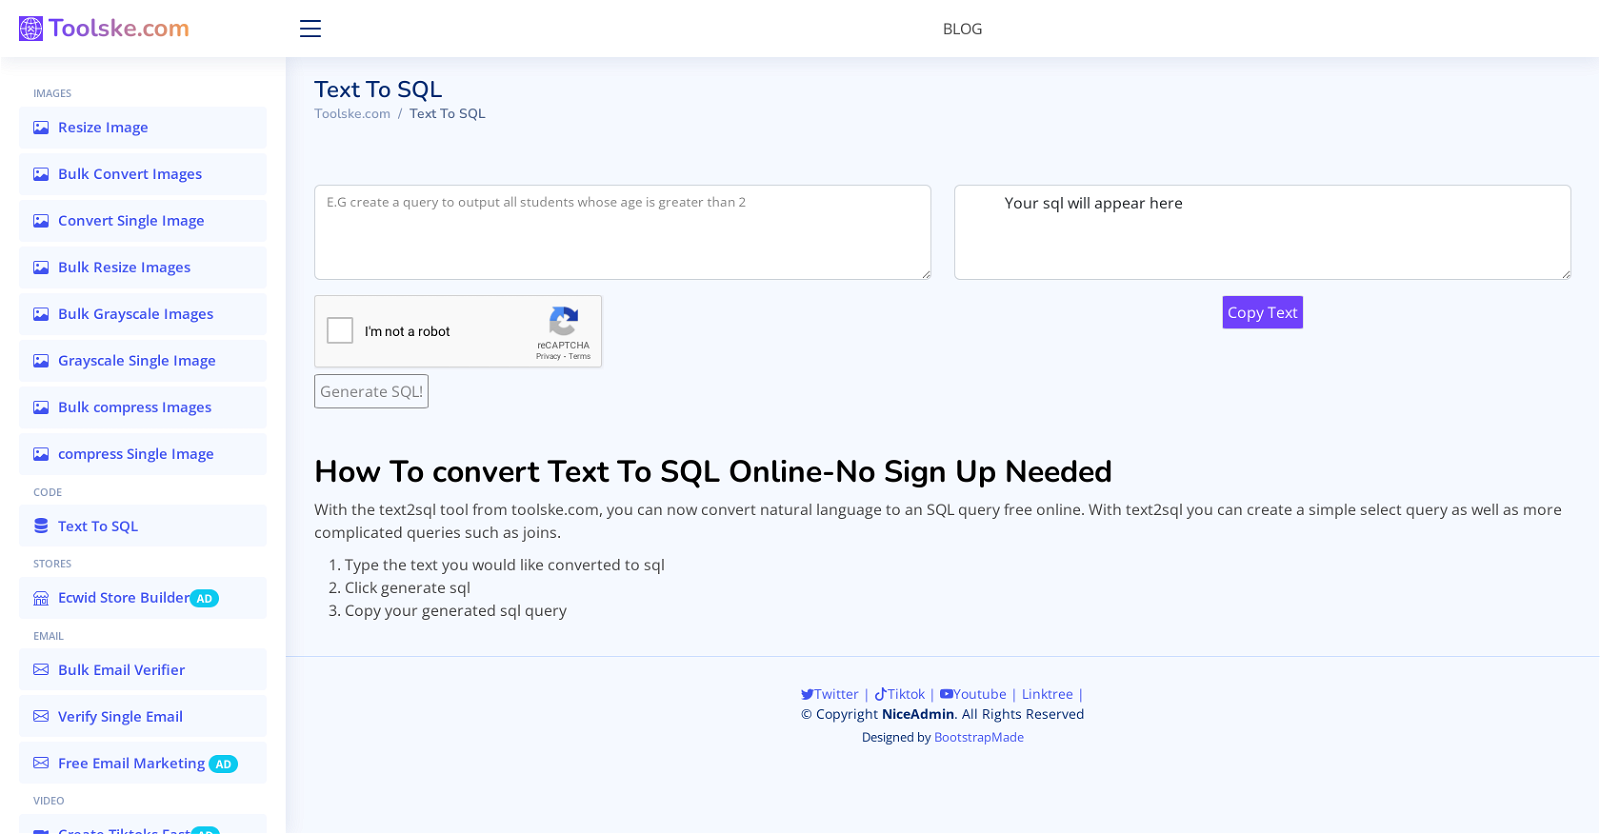 Text2sql by Toolske website